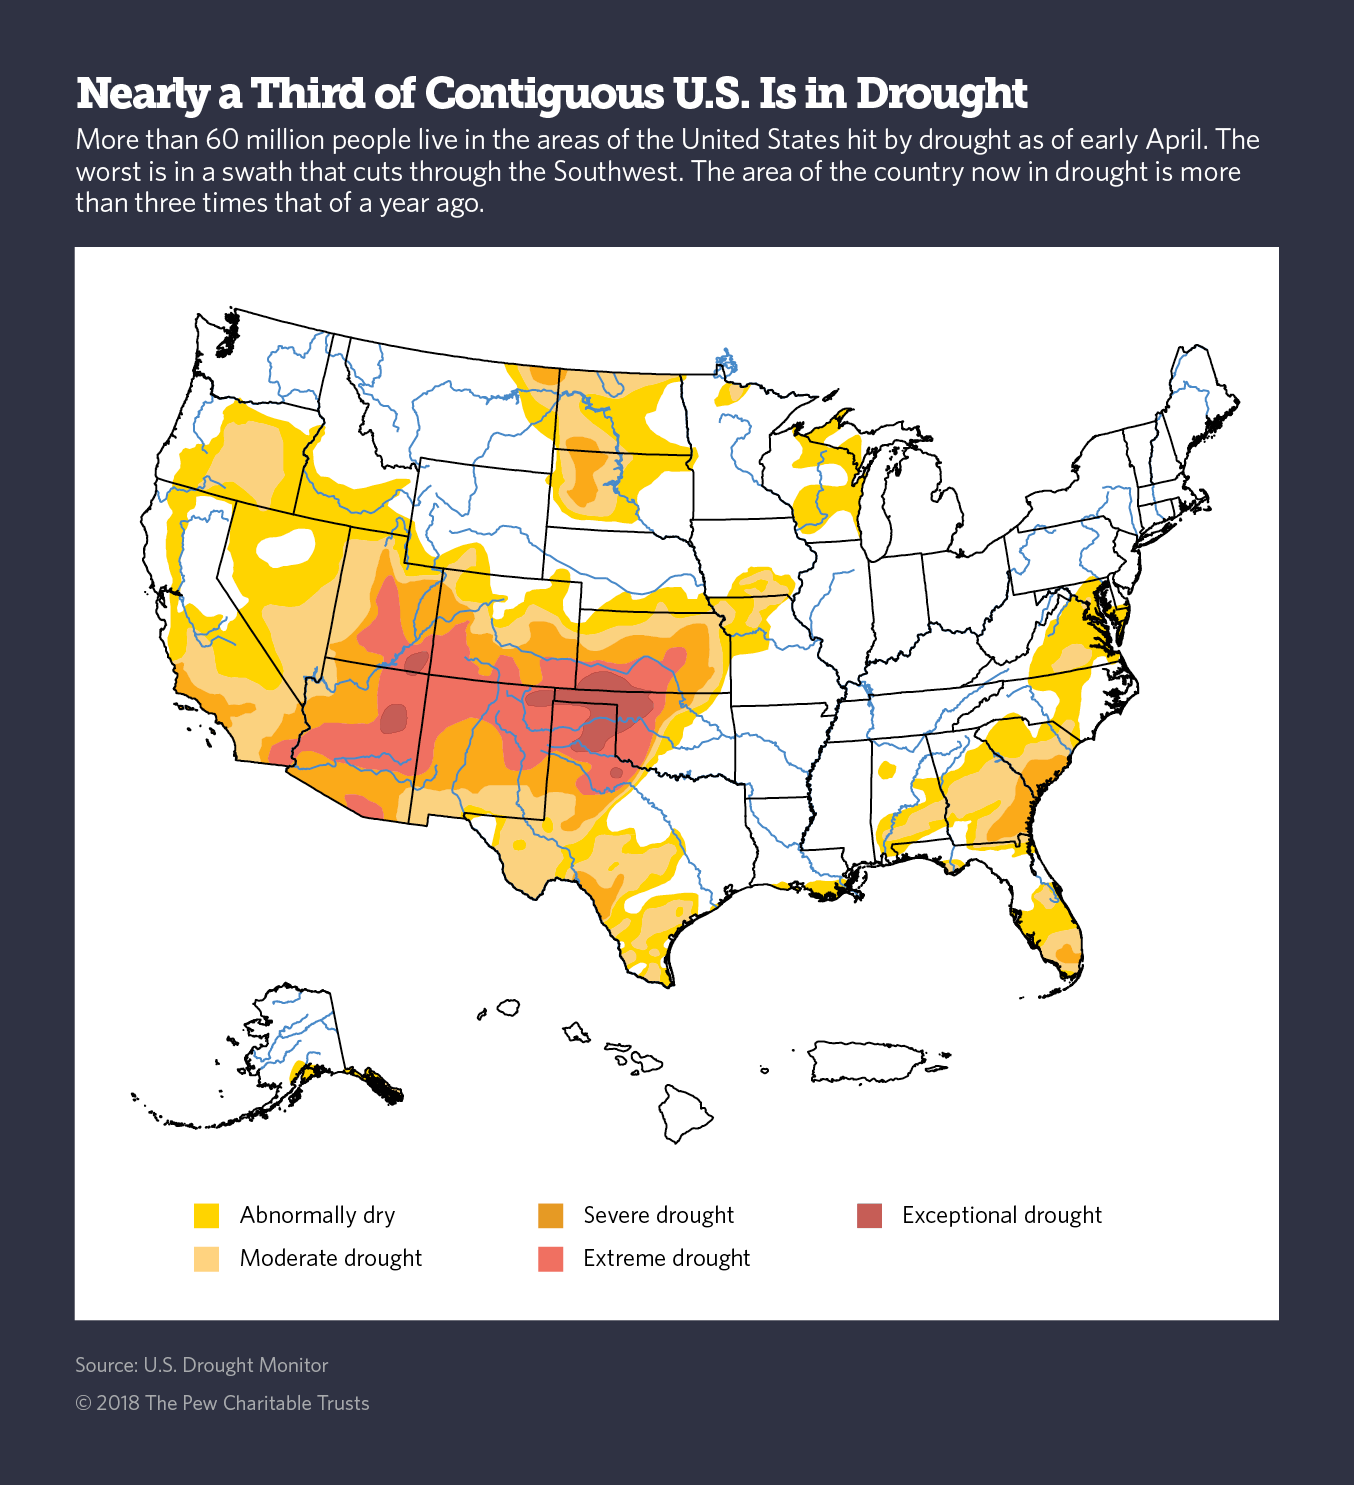 CATCH THE BUZZ – 6 of 10 Top Honey Producing States Now Under Drought Conditions, Again!